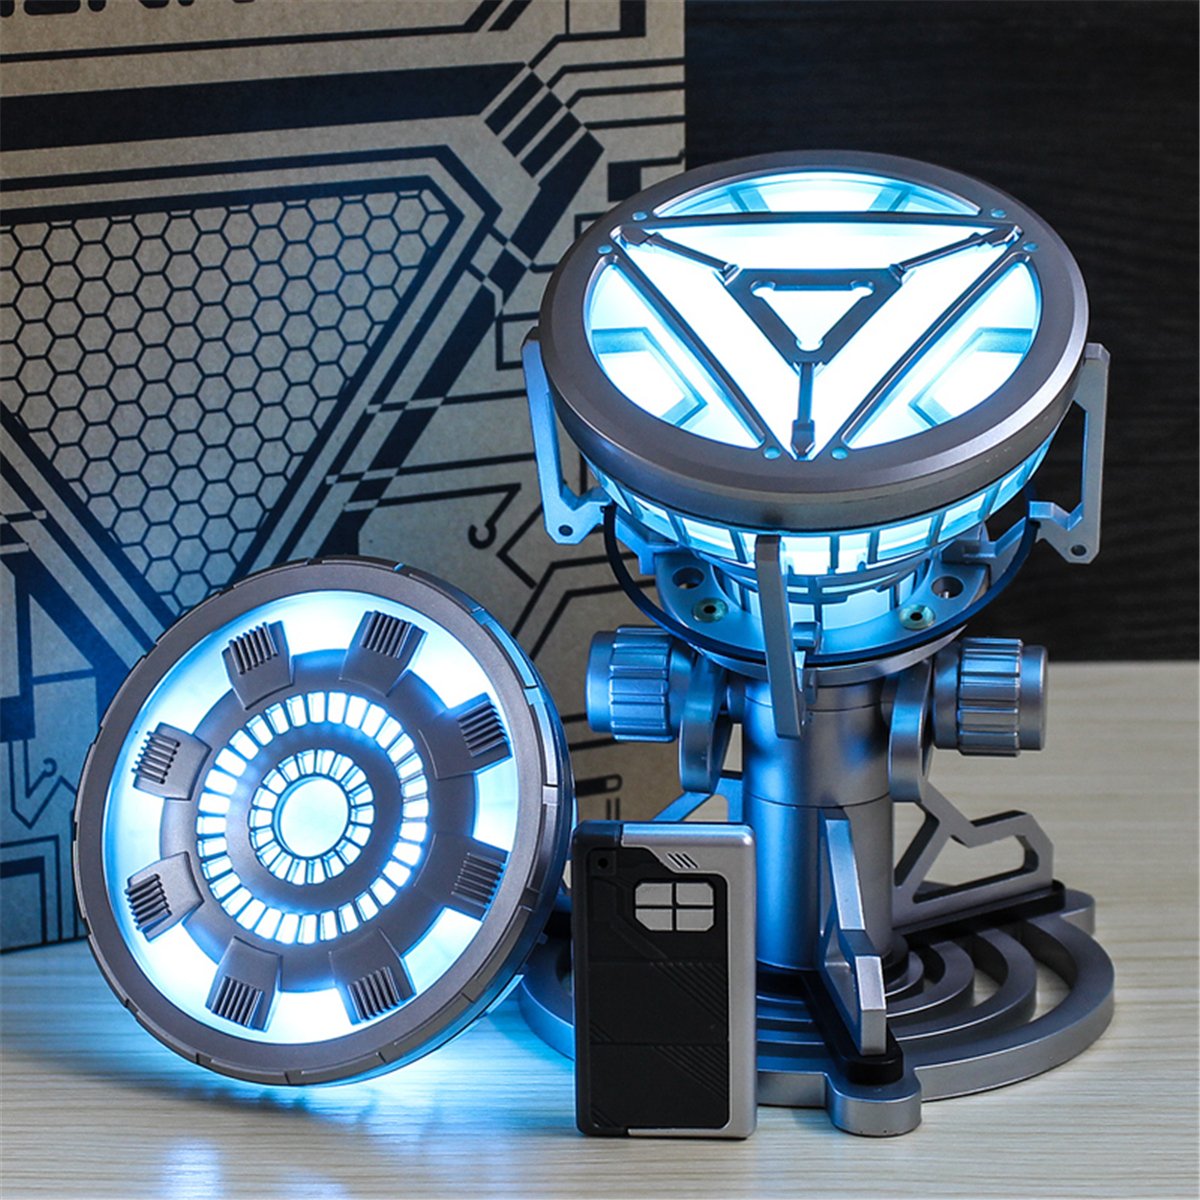 1:1 ARC REACTOR LED Chest Heart Light-up Lamp Movie ABC Props Model Kit Science Toy 1